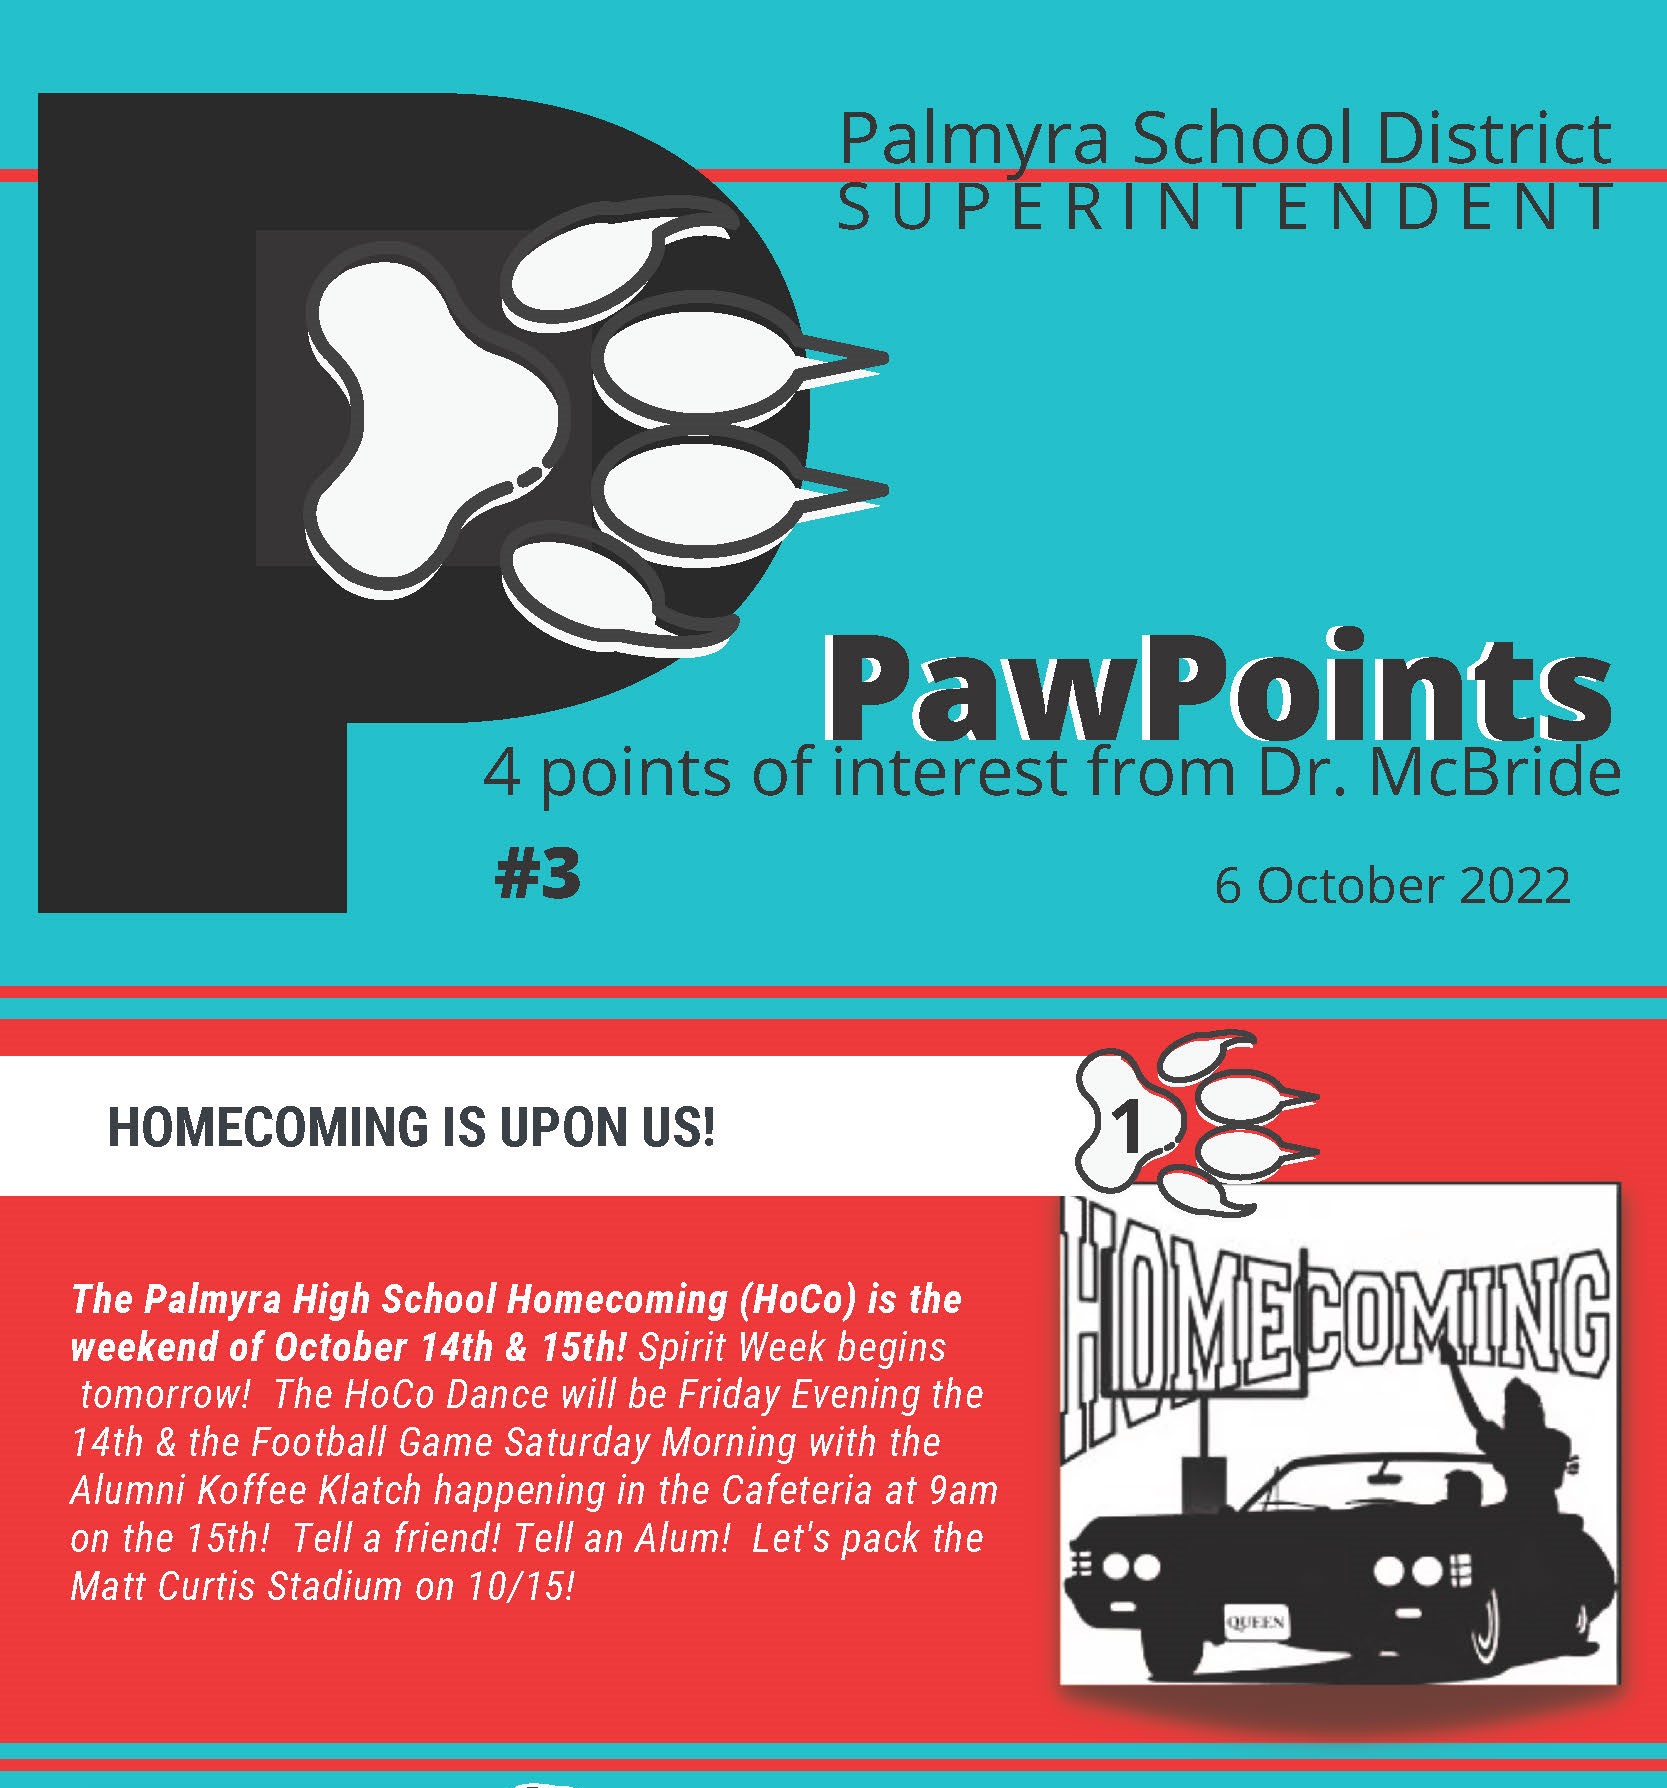 week 3 pawpoints with homecoming as #1